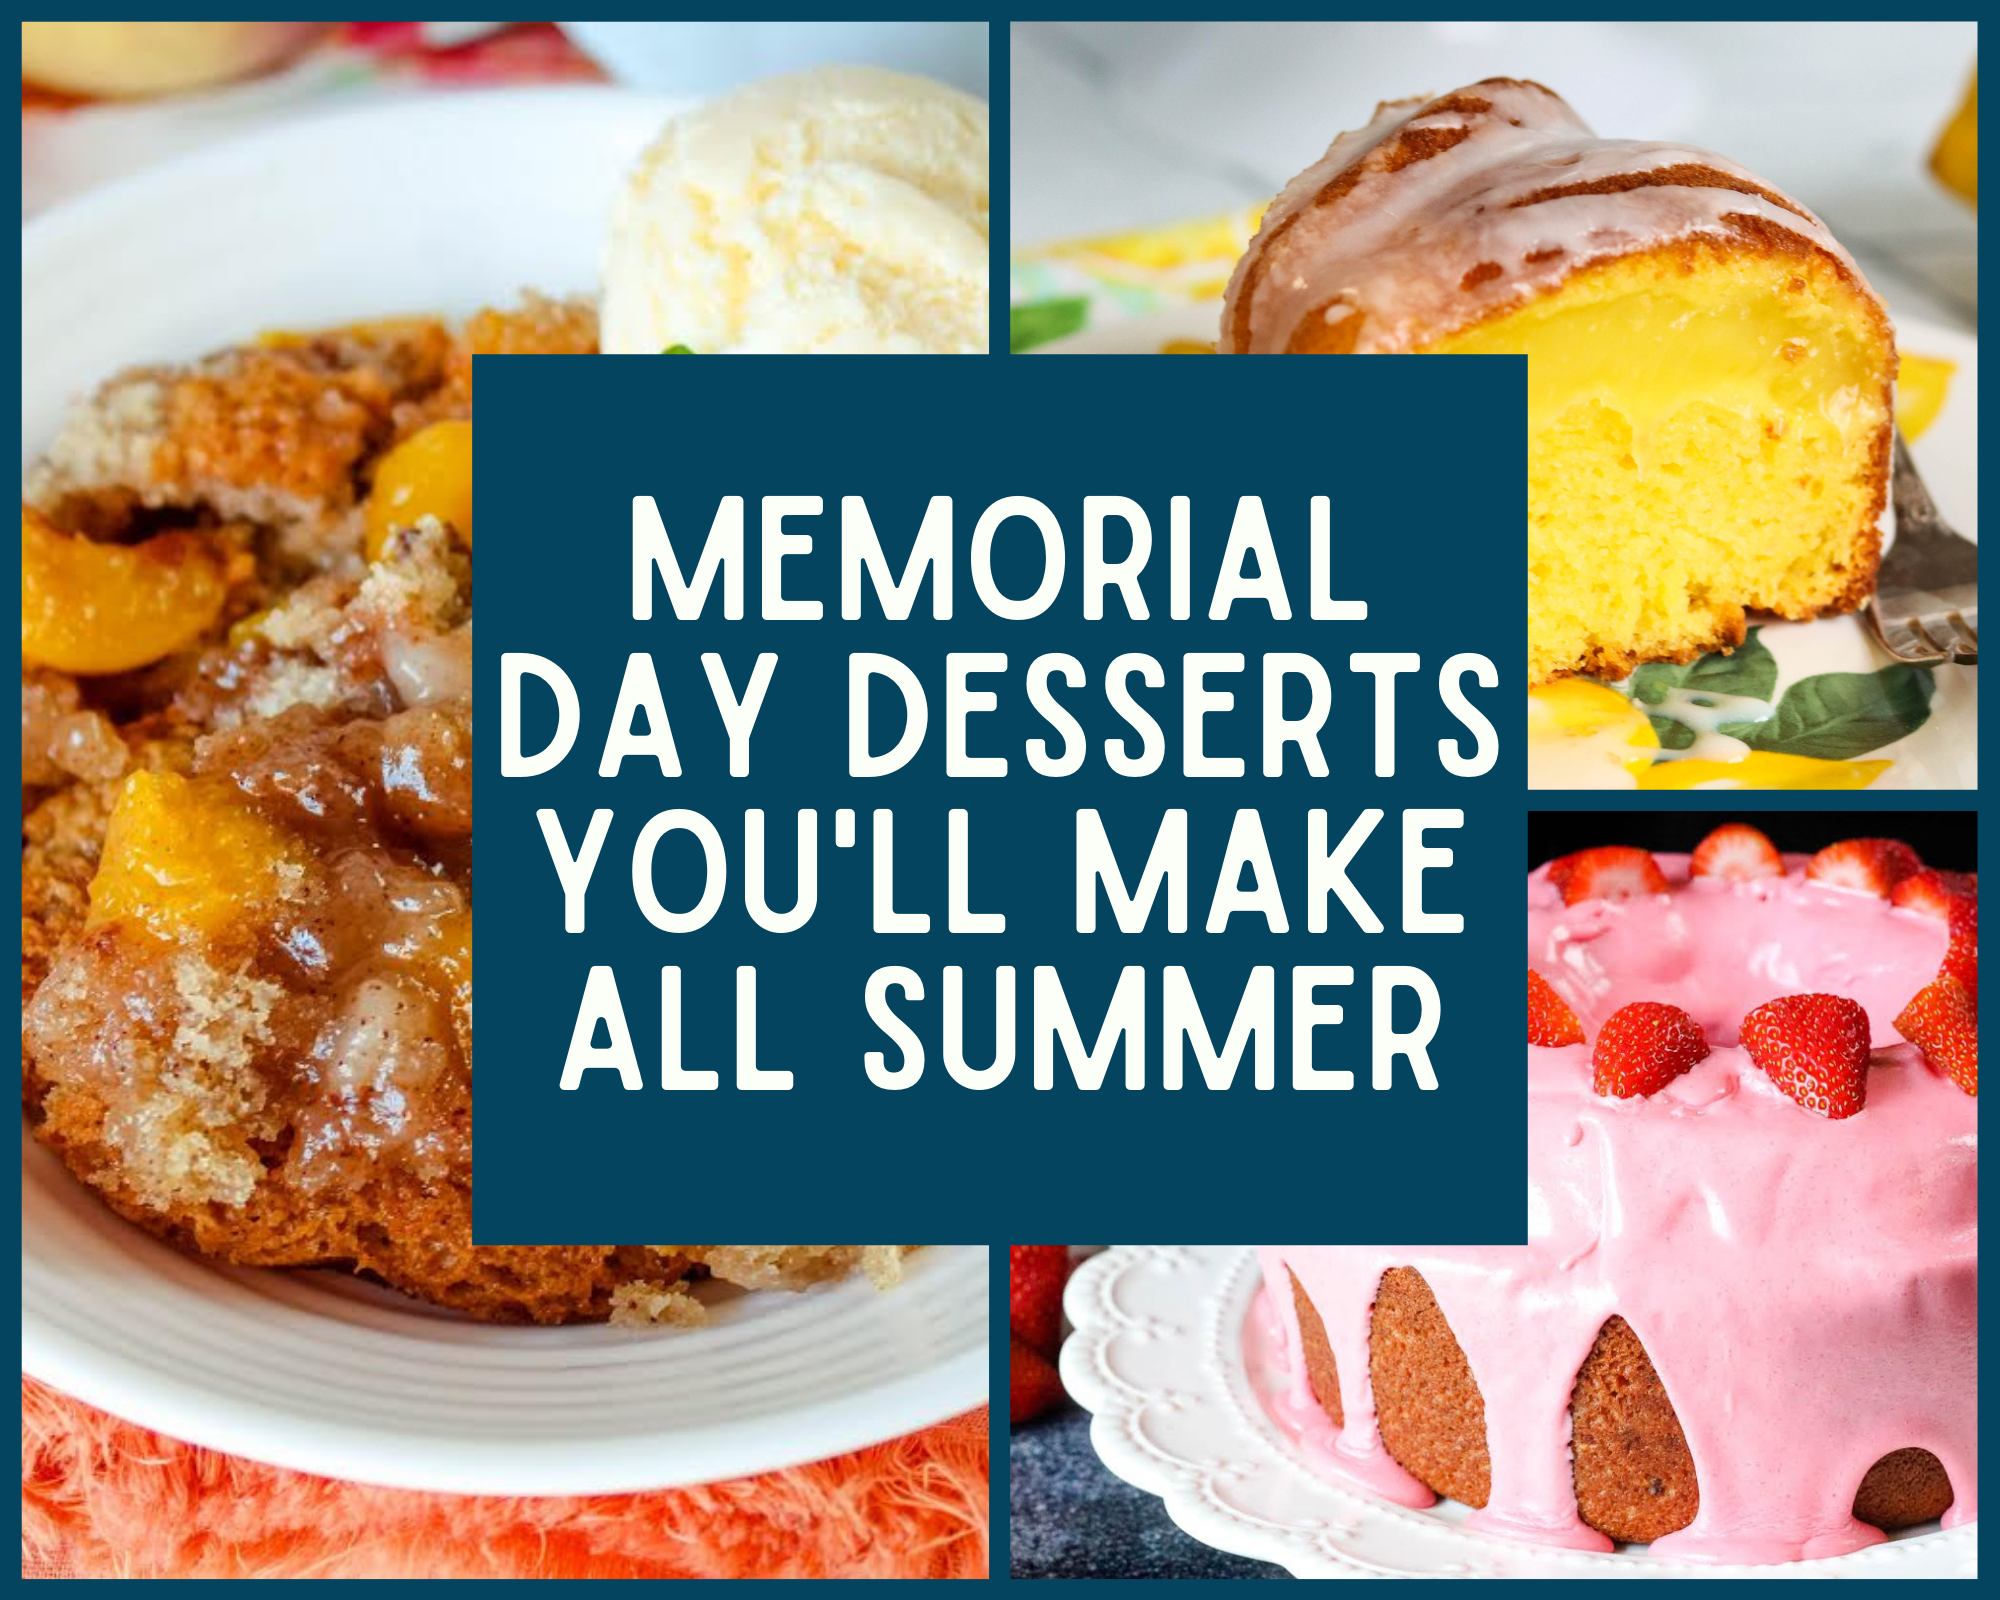 Memorial Day Desserts You'll Make All Summer